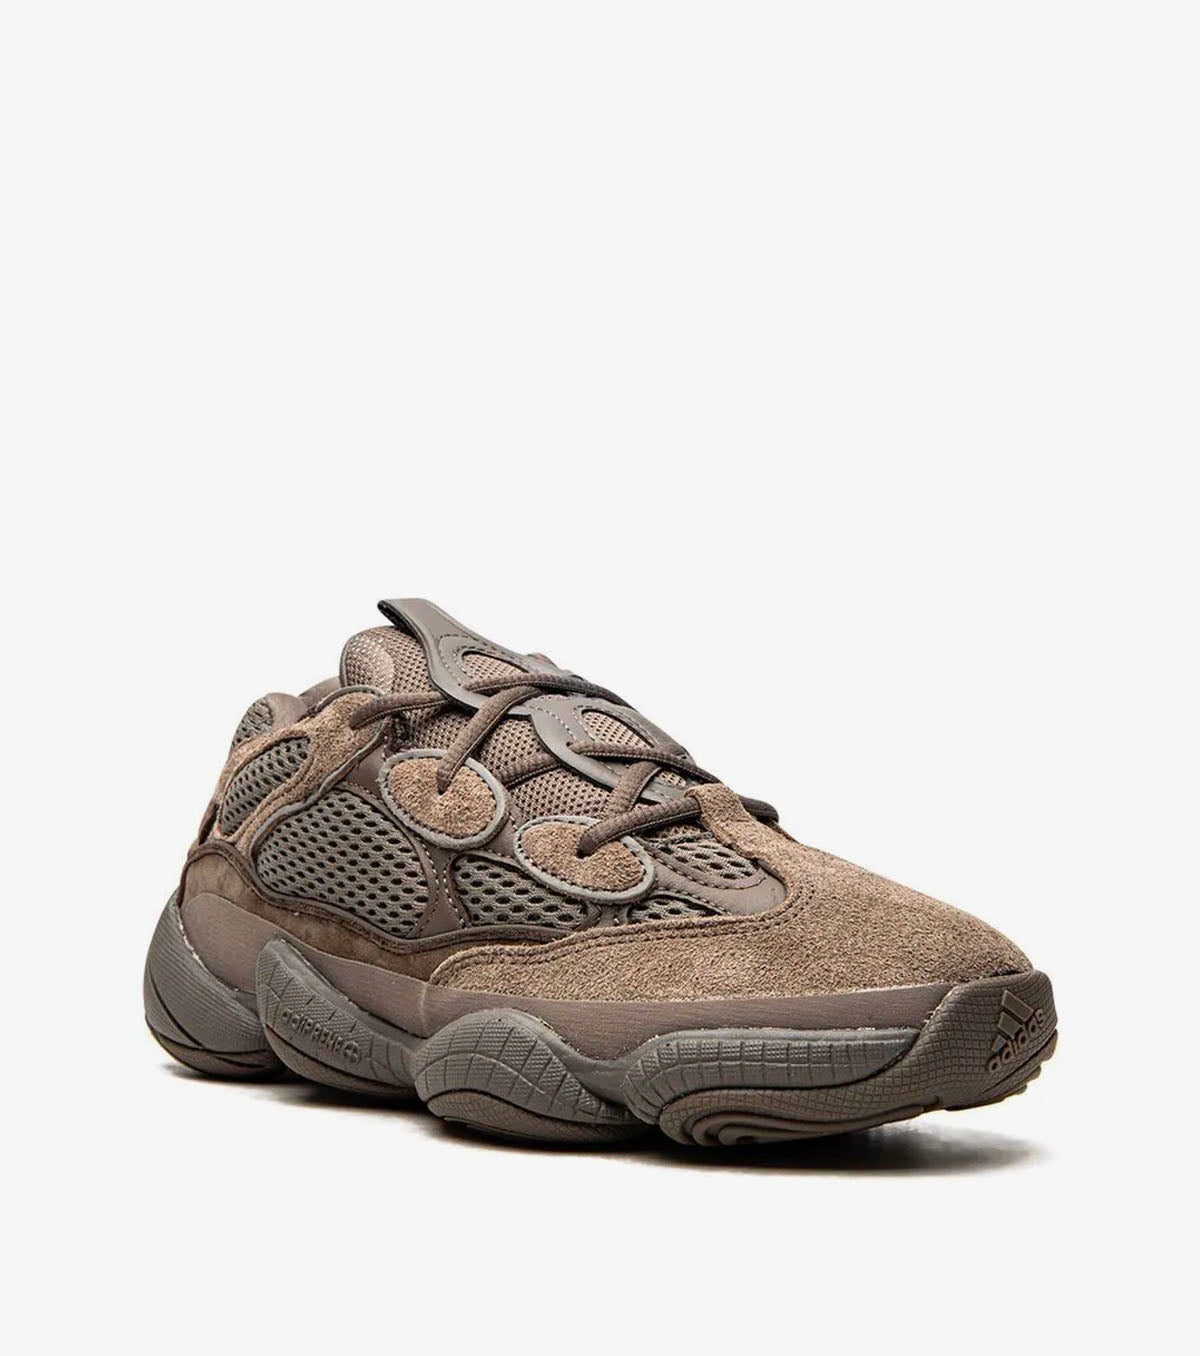 YEEZY 500 "Clay Brown" - SNKRBASE